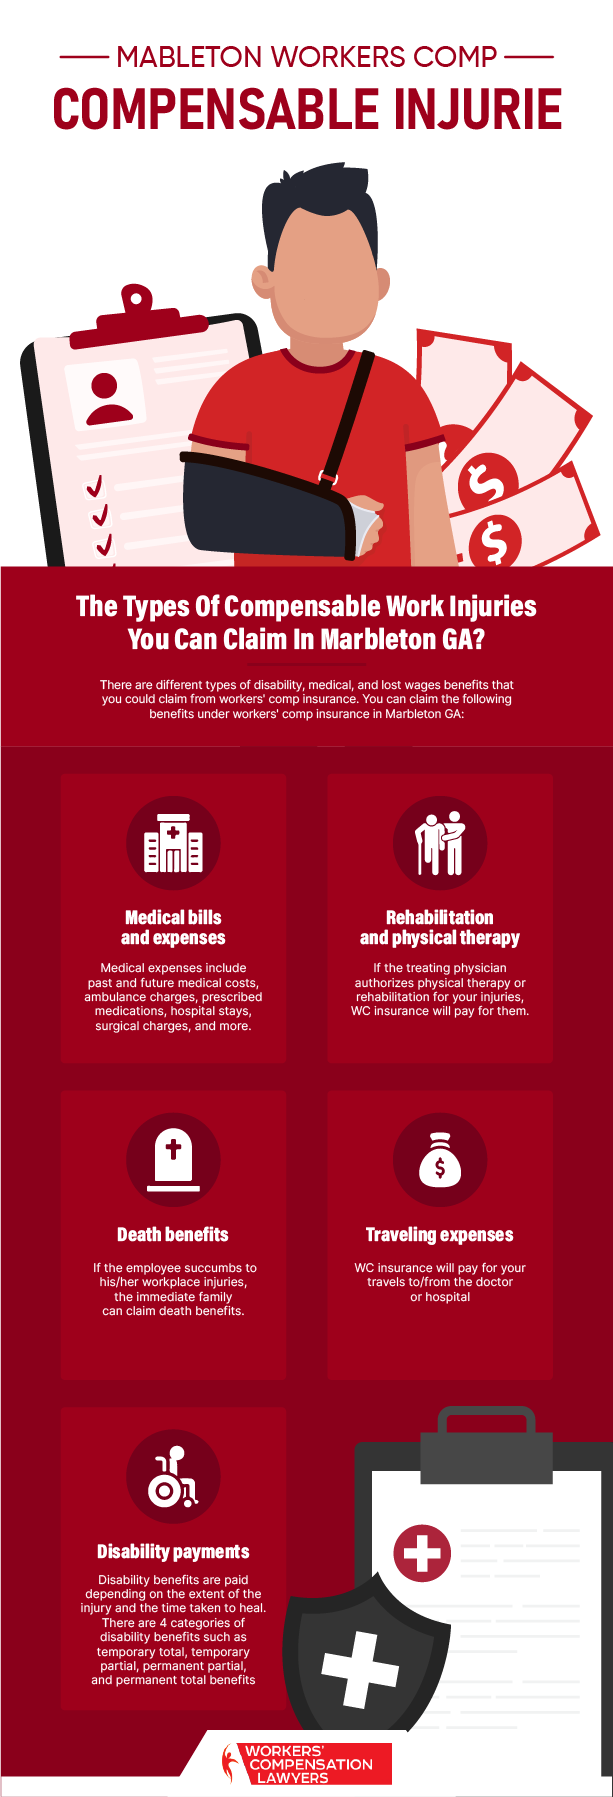 Mableton Workers Compensation Compensable Injury Infographic